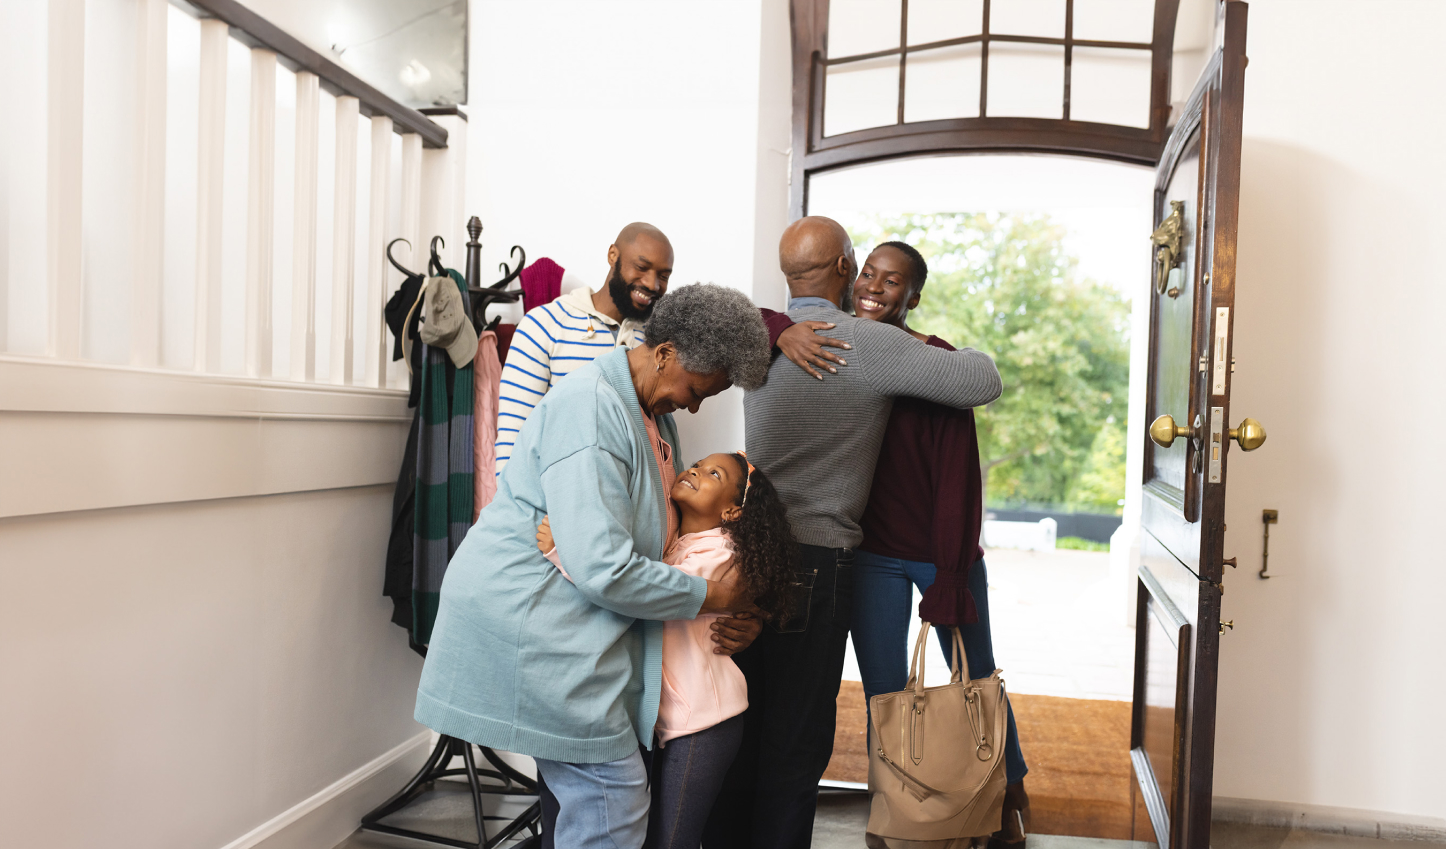 happy african american family entering house and welcoming each other